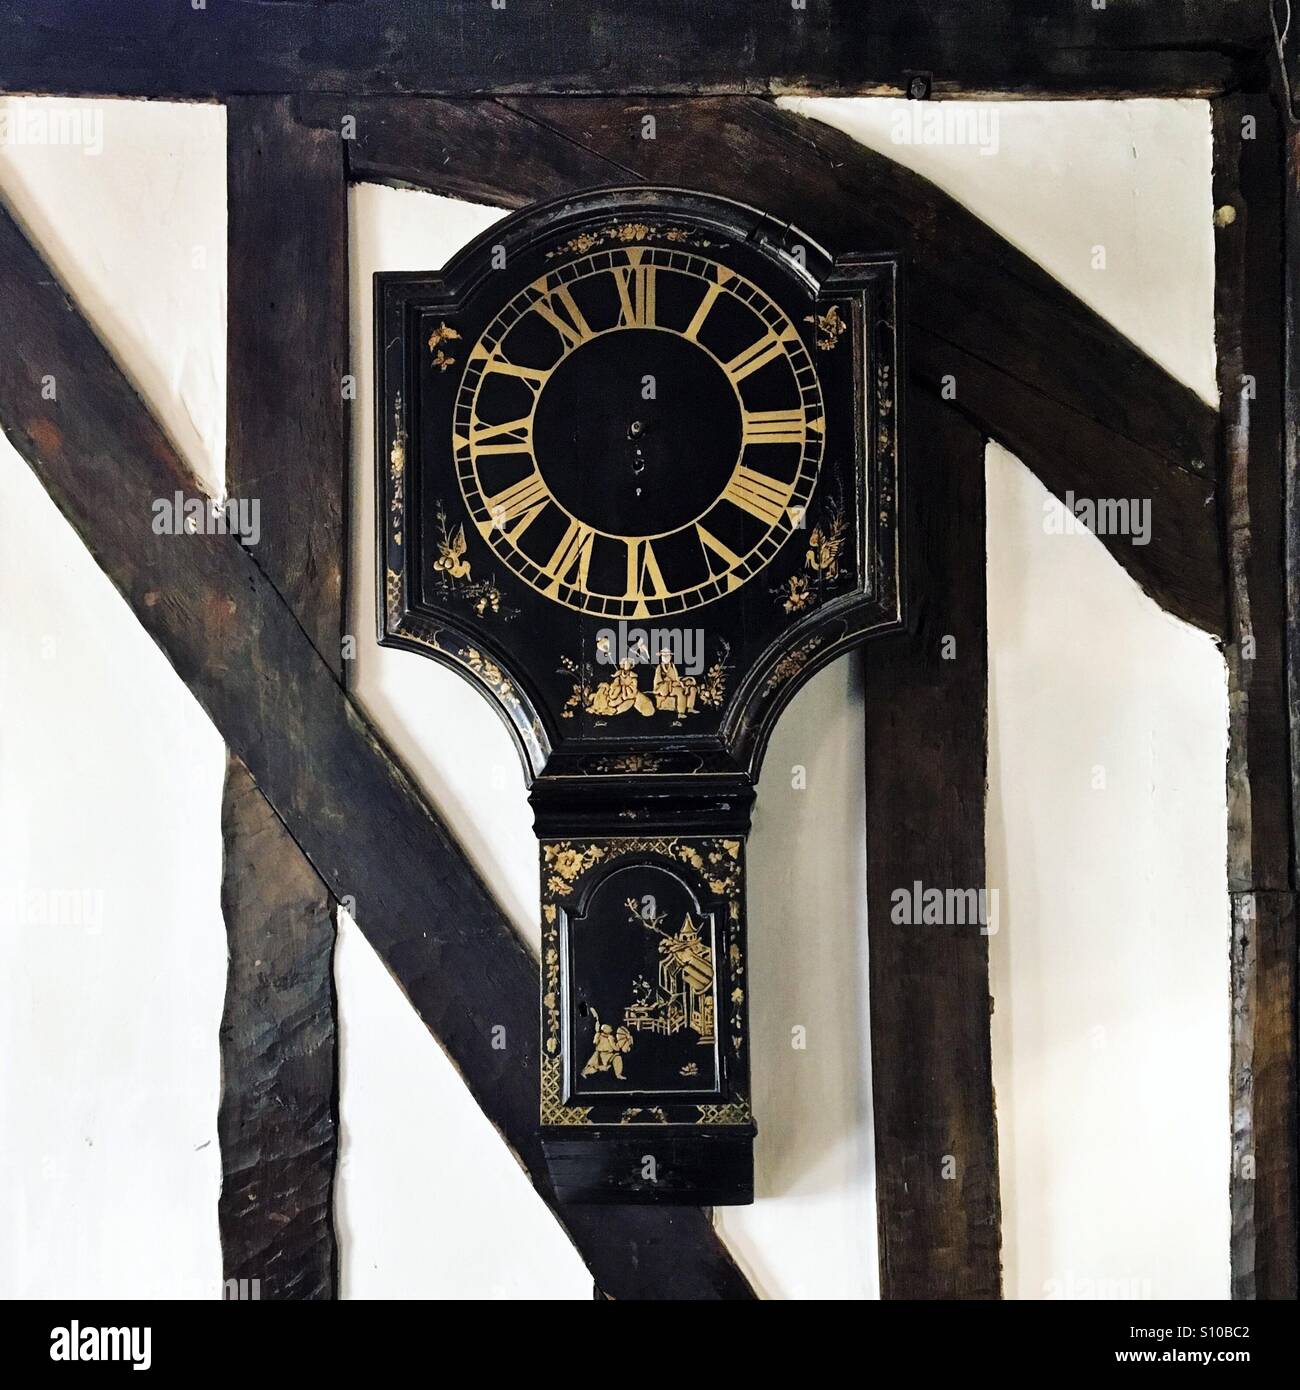 Antique clock with no hands Stock Photo